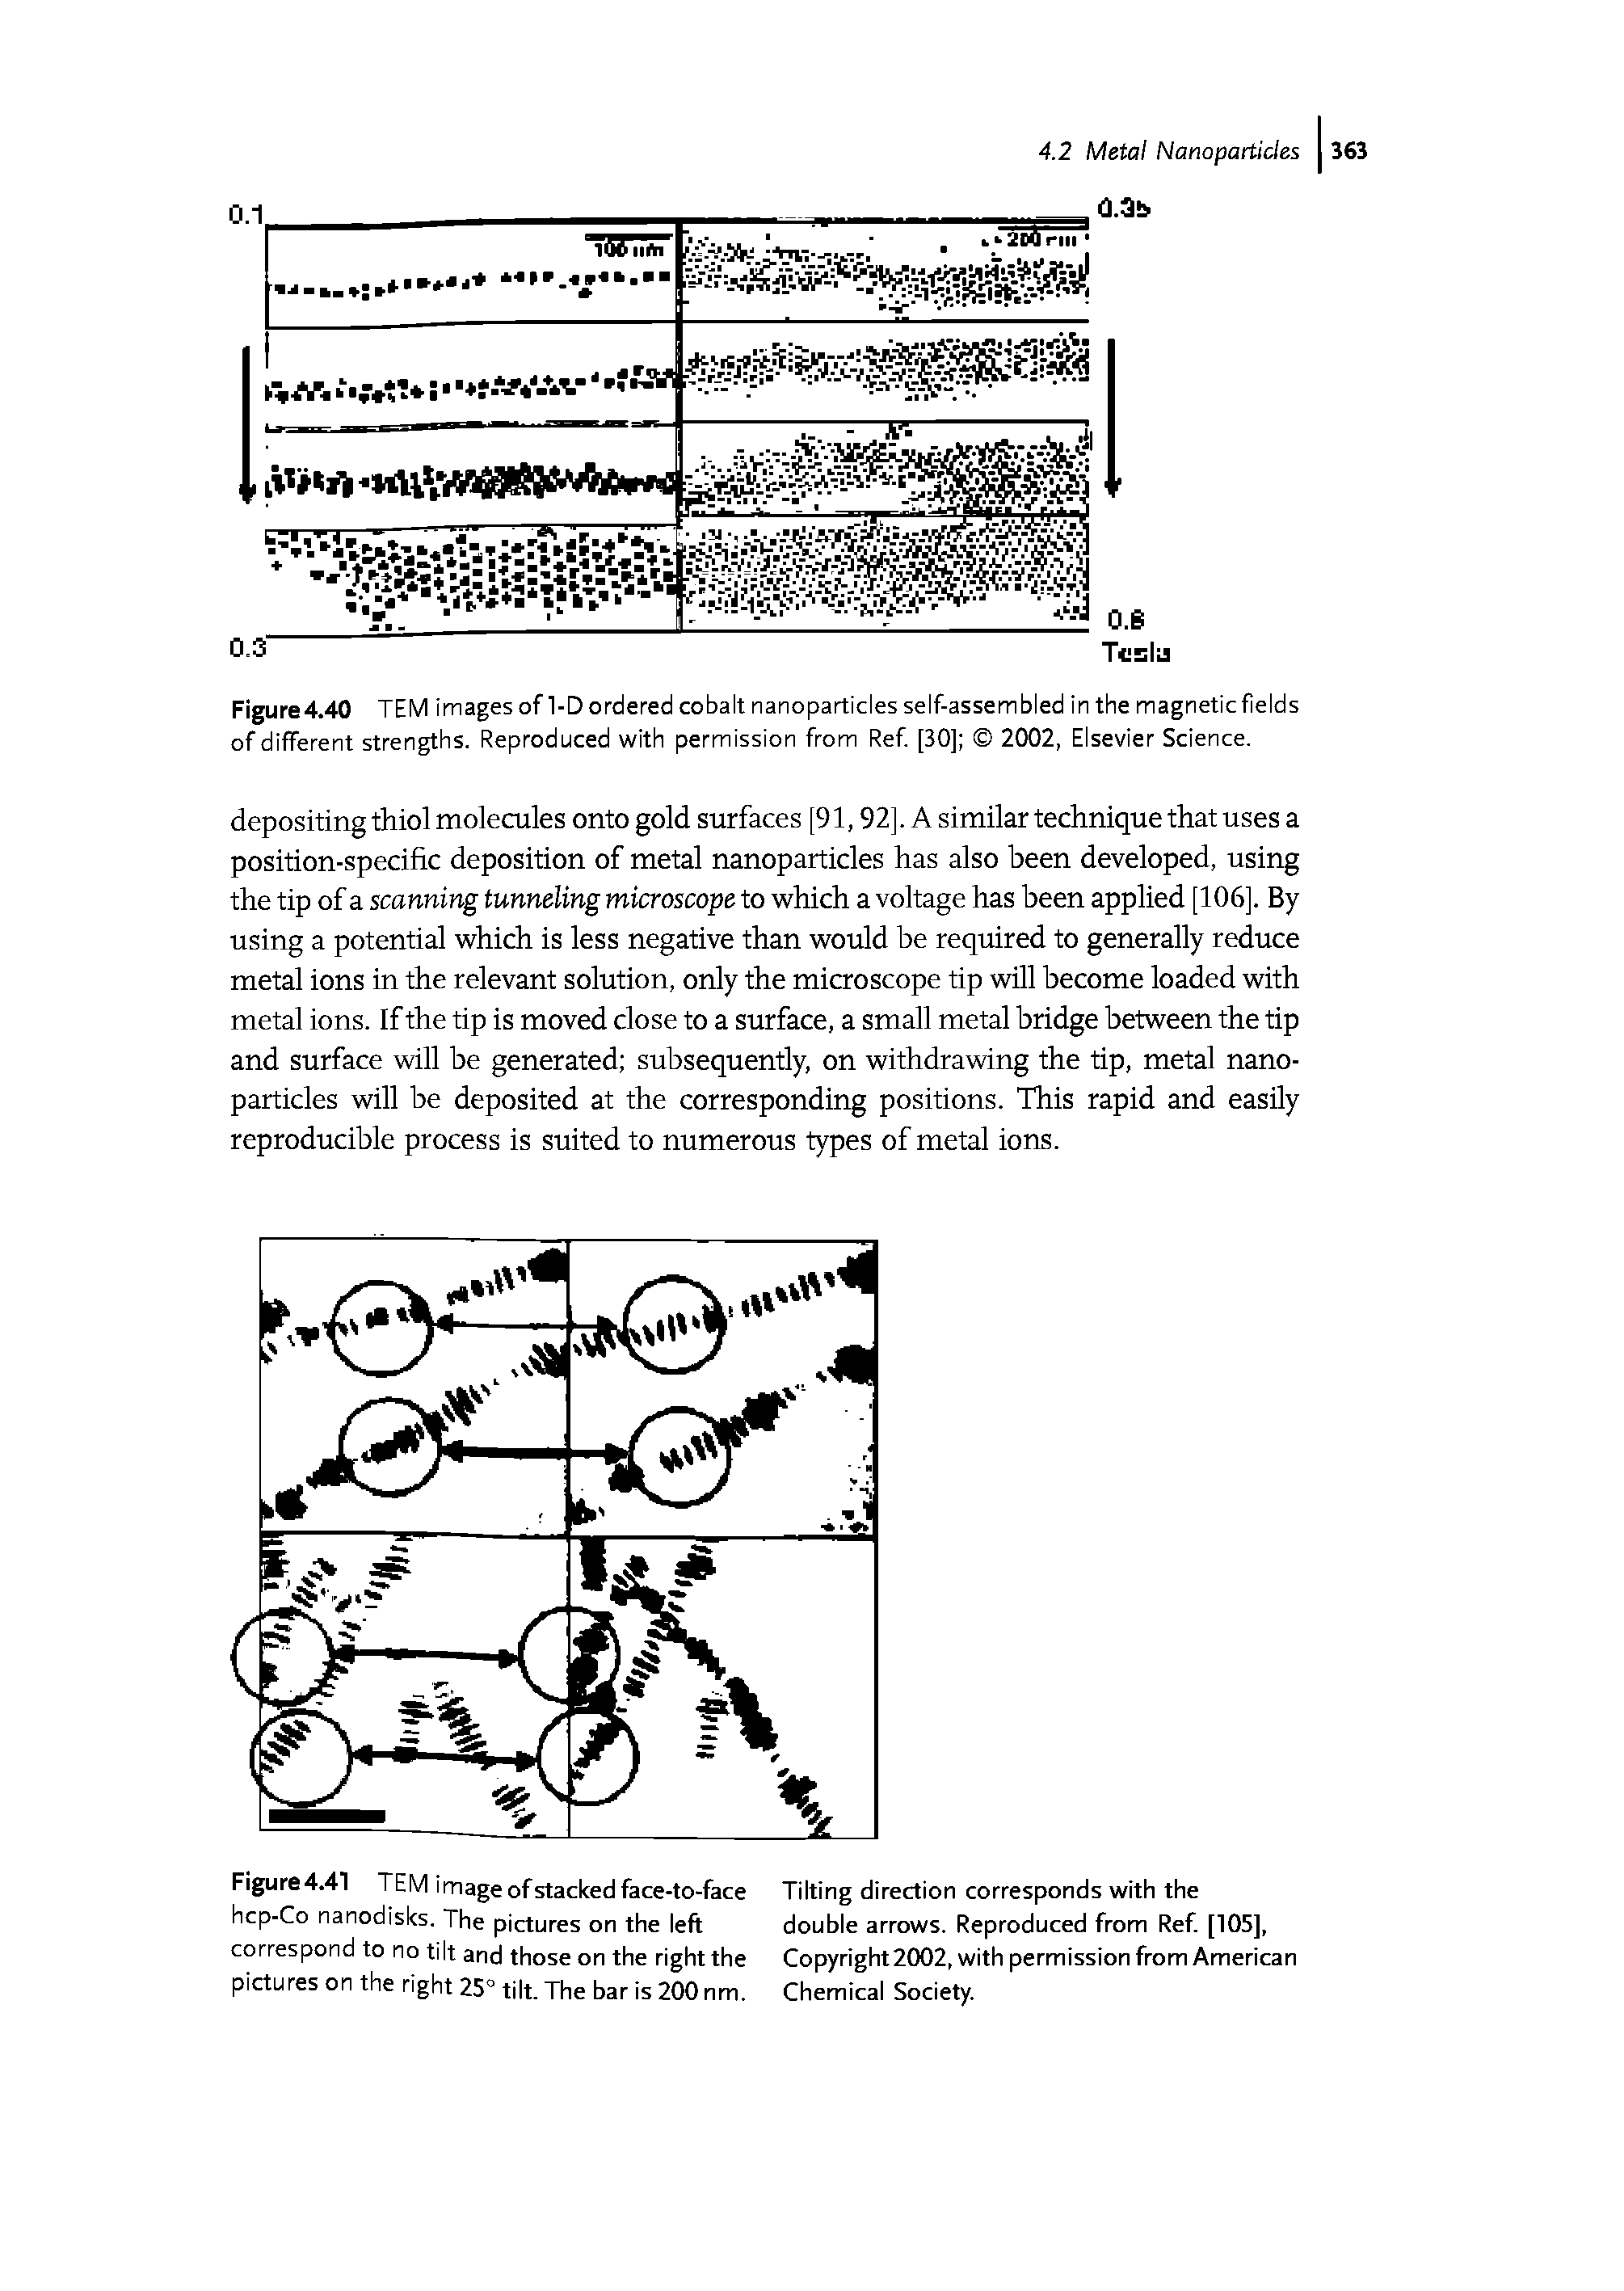 Figure4.40 TEM images of 1-D ordered cobalt nanoparticles self-assembled in the magnetic fields of different strengths. Reproduced with permission from Ref [30] 2002, Elsevier Science.